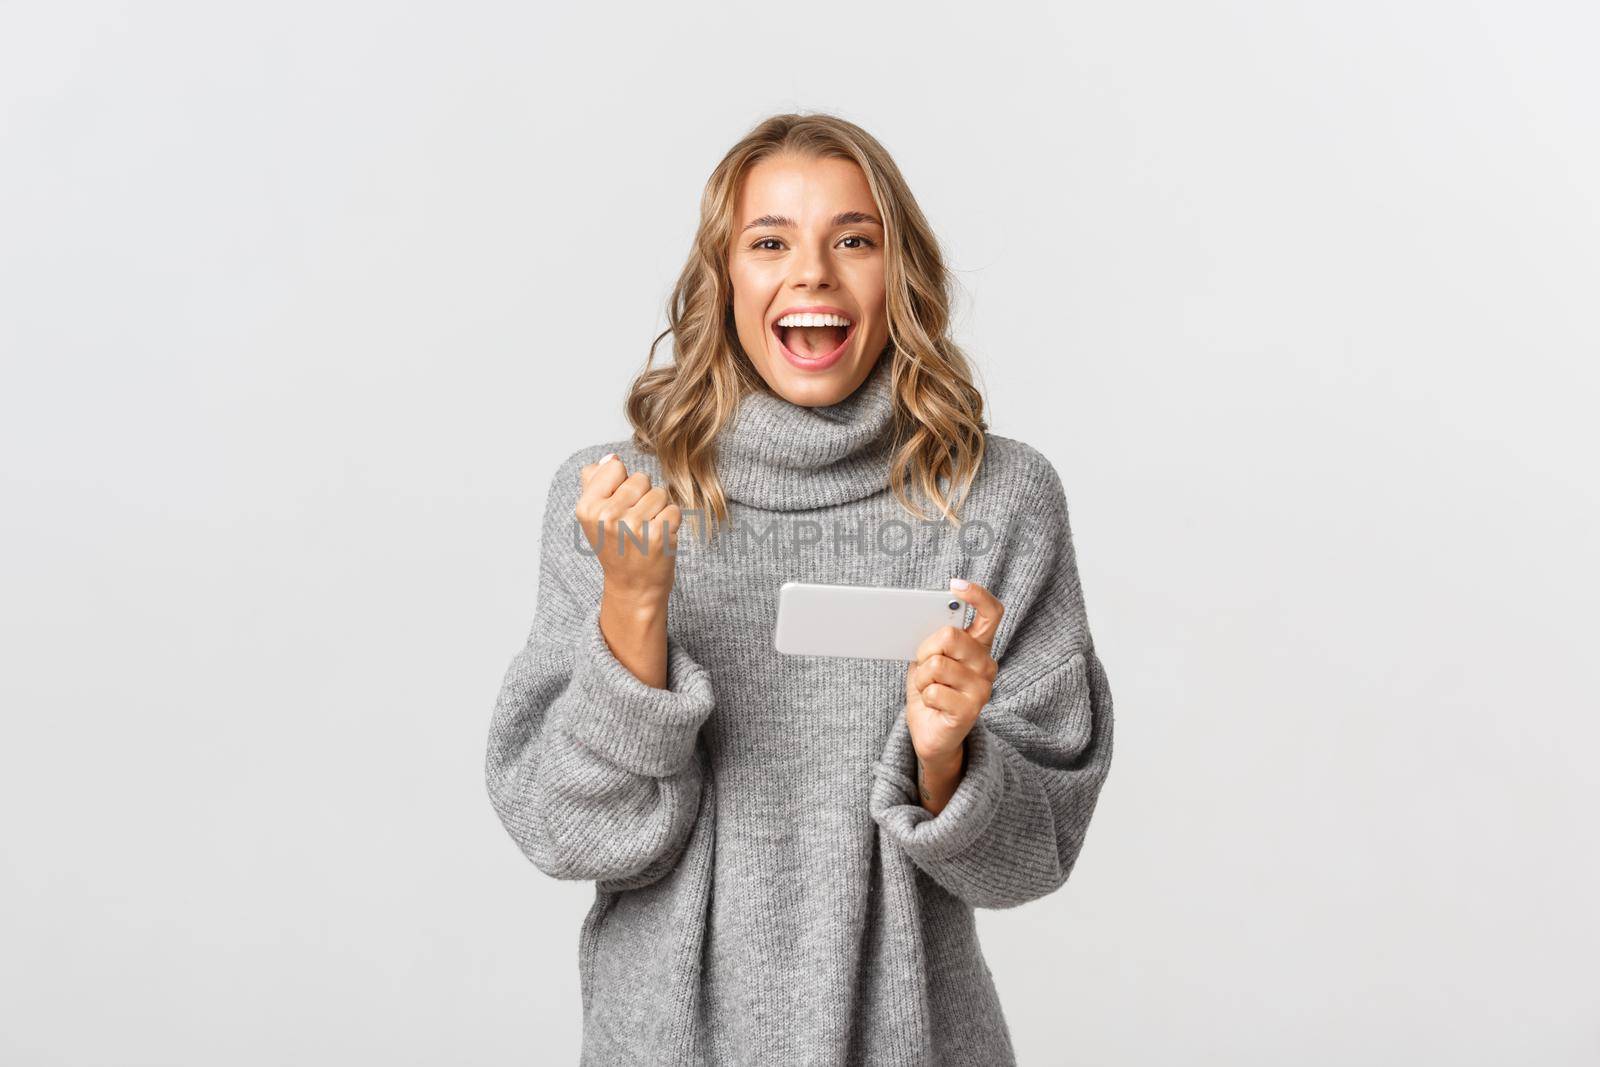 Image of happy winning girl in grey sweater, saying yes and triumphing, holding mobile phone, achieve goal in smartphone application, standing over white background.